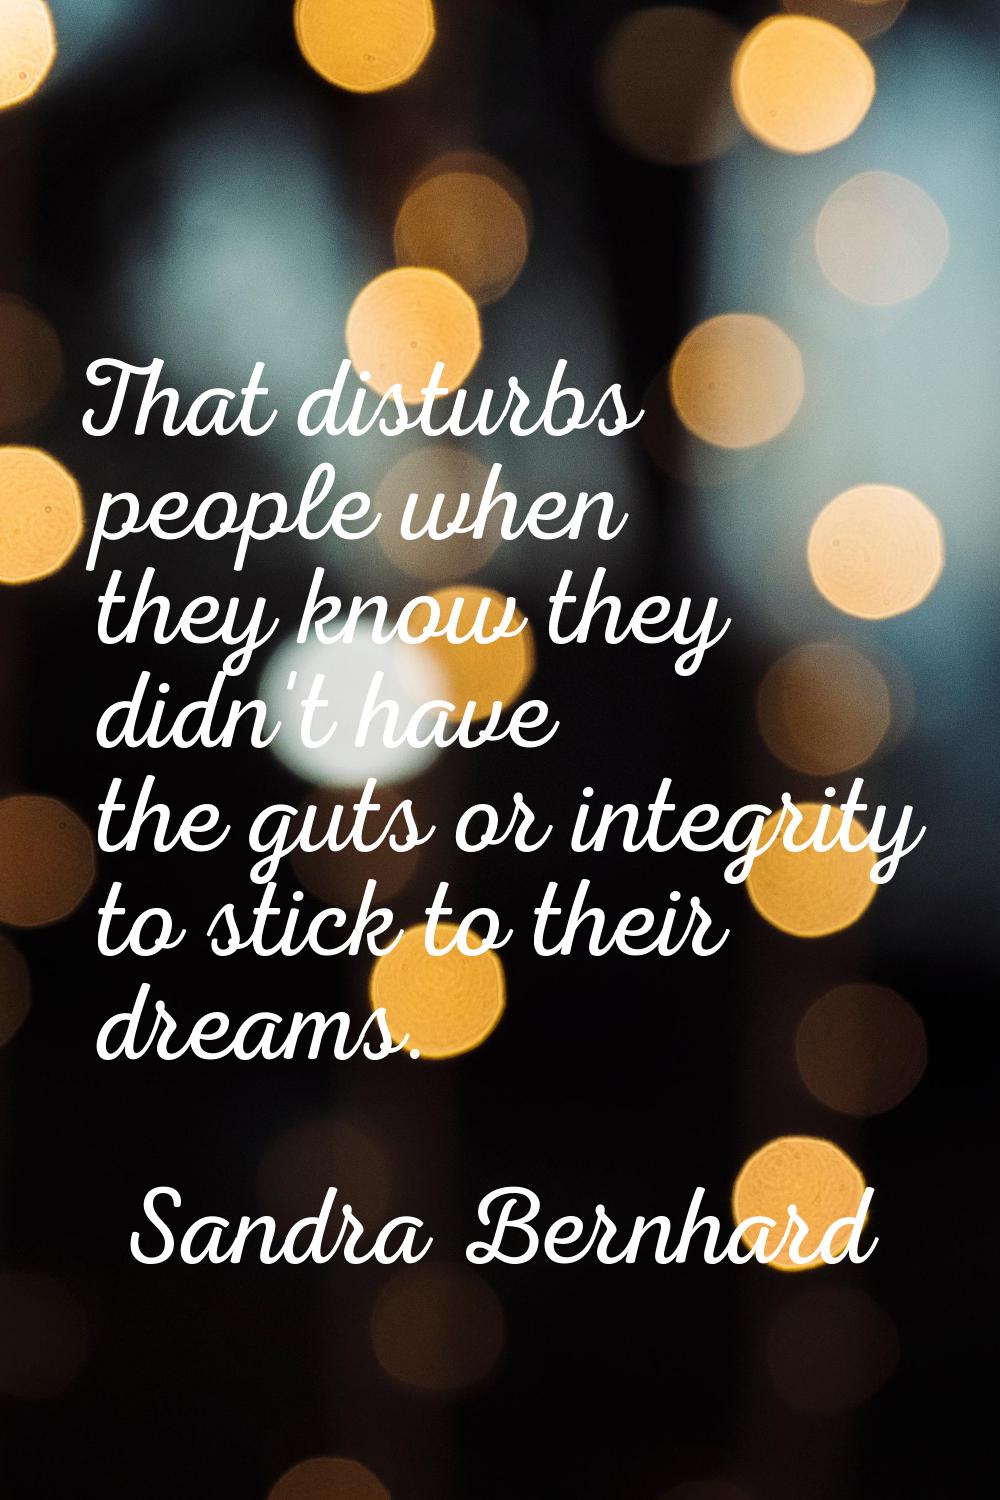 That disturbs people when they know they didn't have the guts or integrity to stick to their dreams